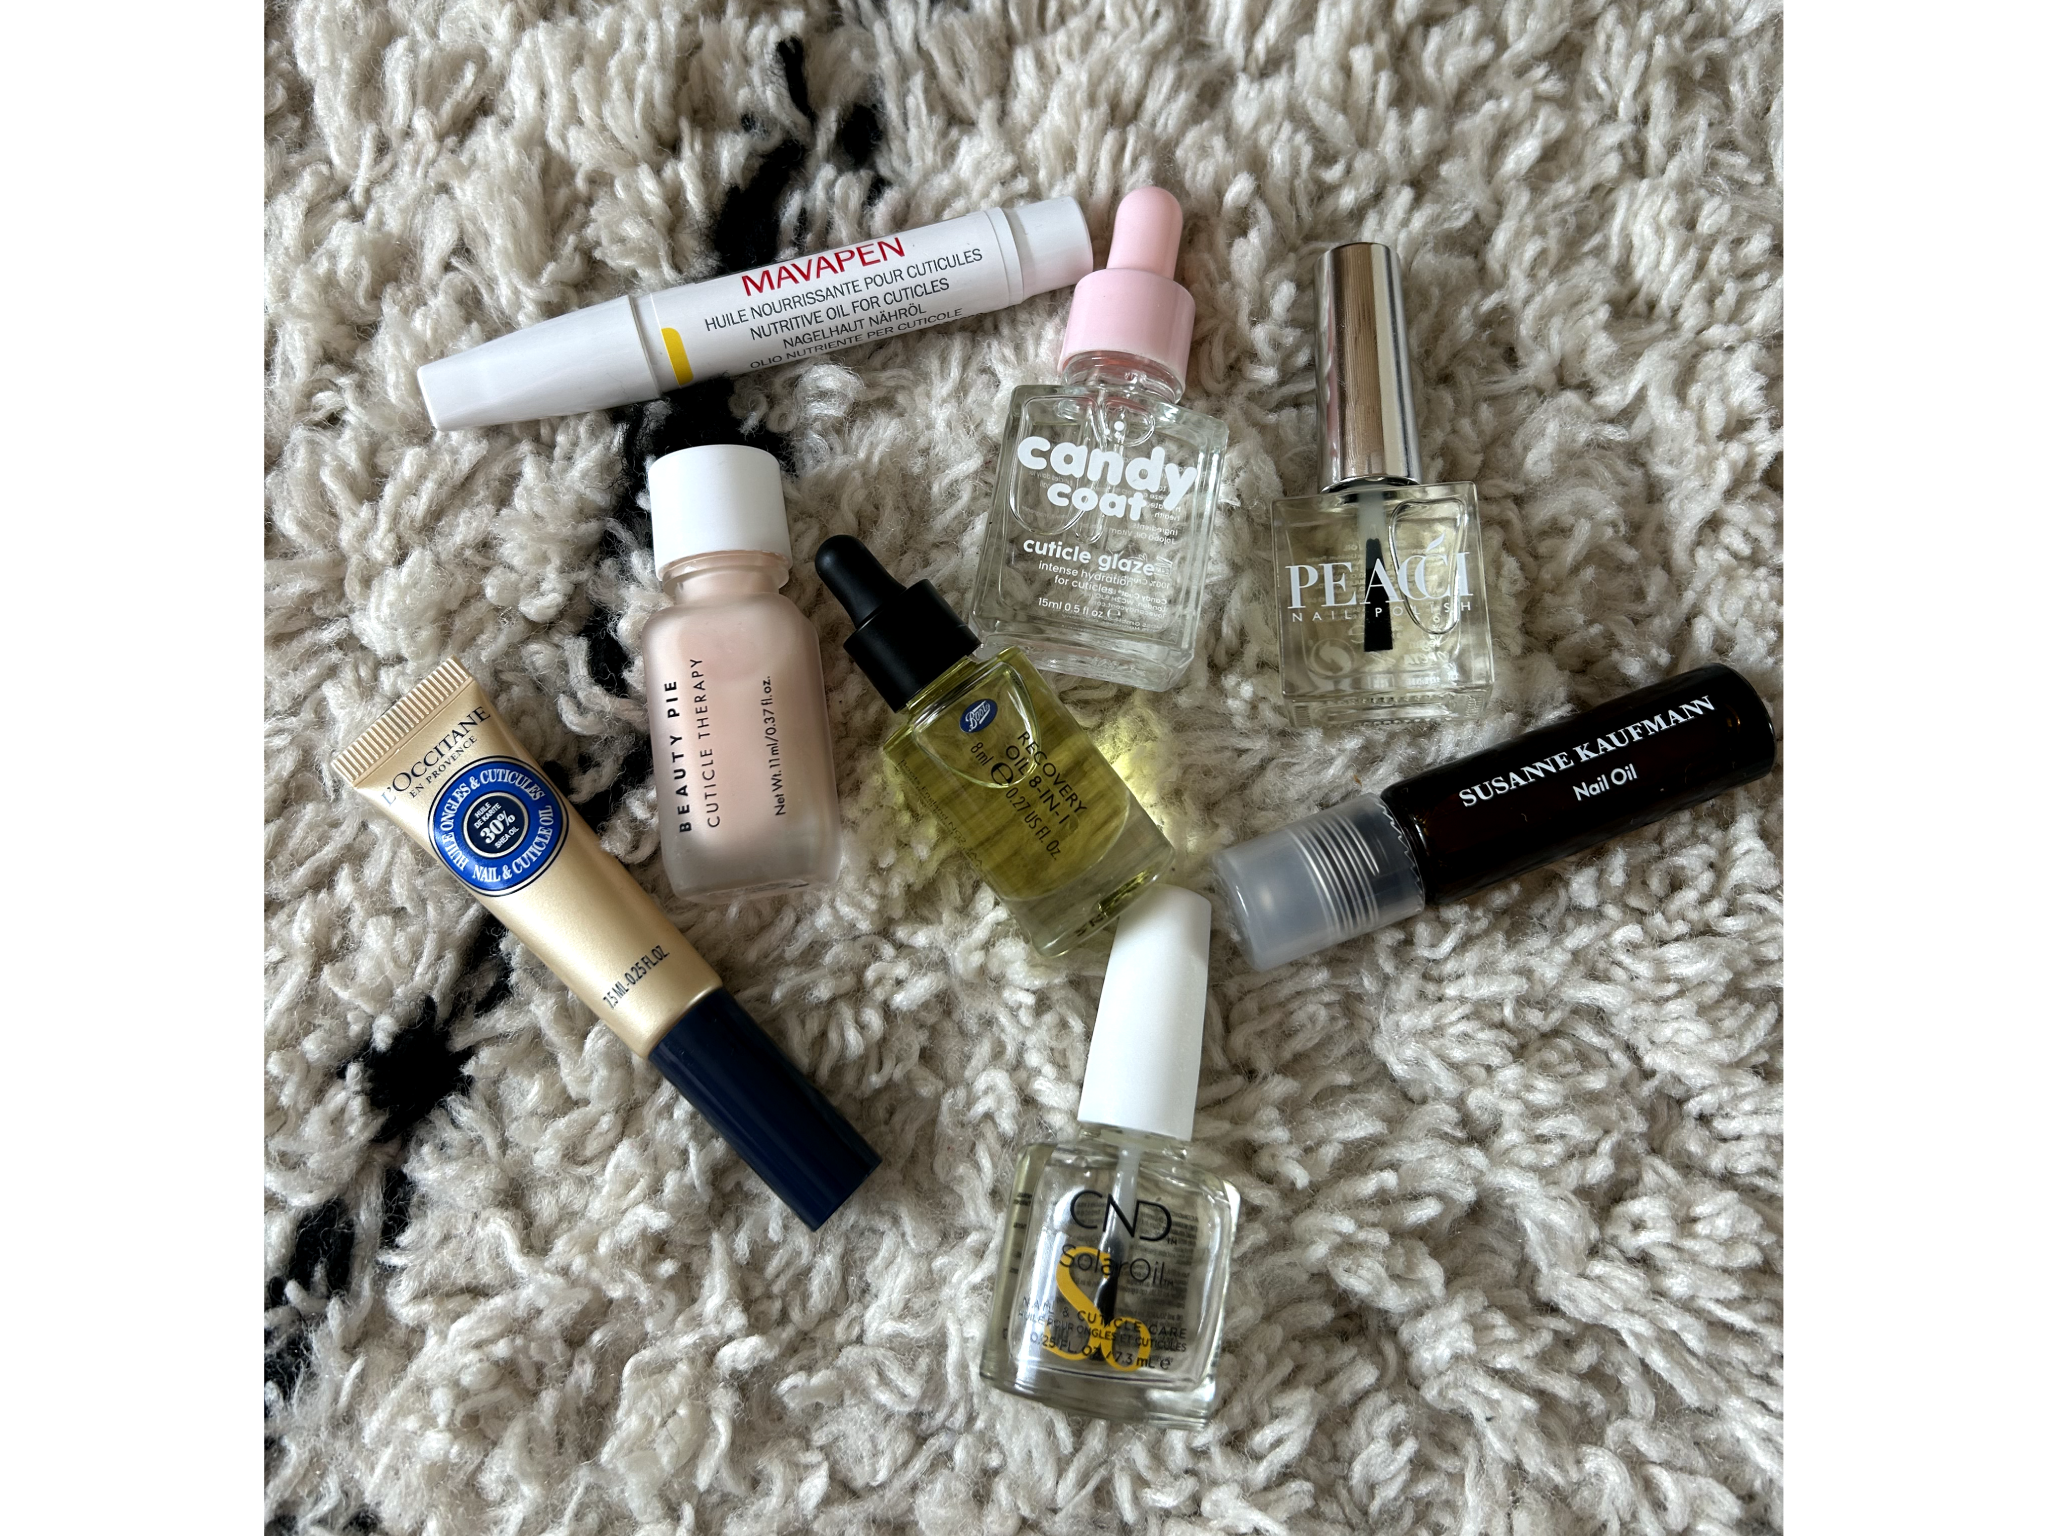 A selection of the tried and tested cuticle oils